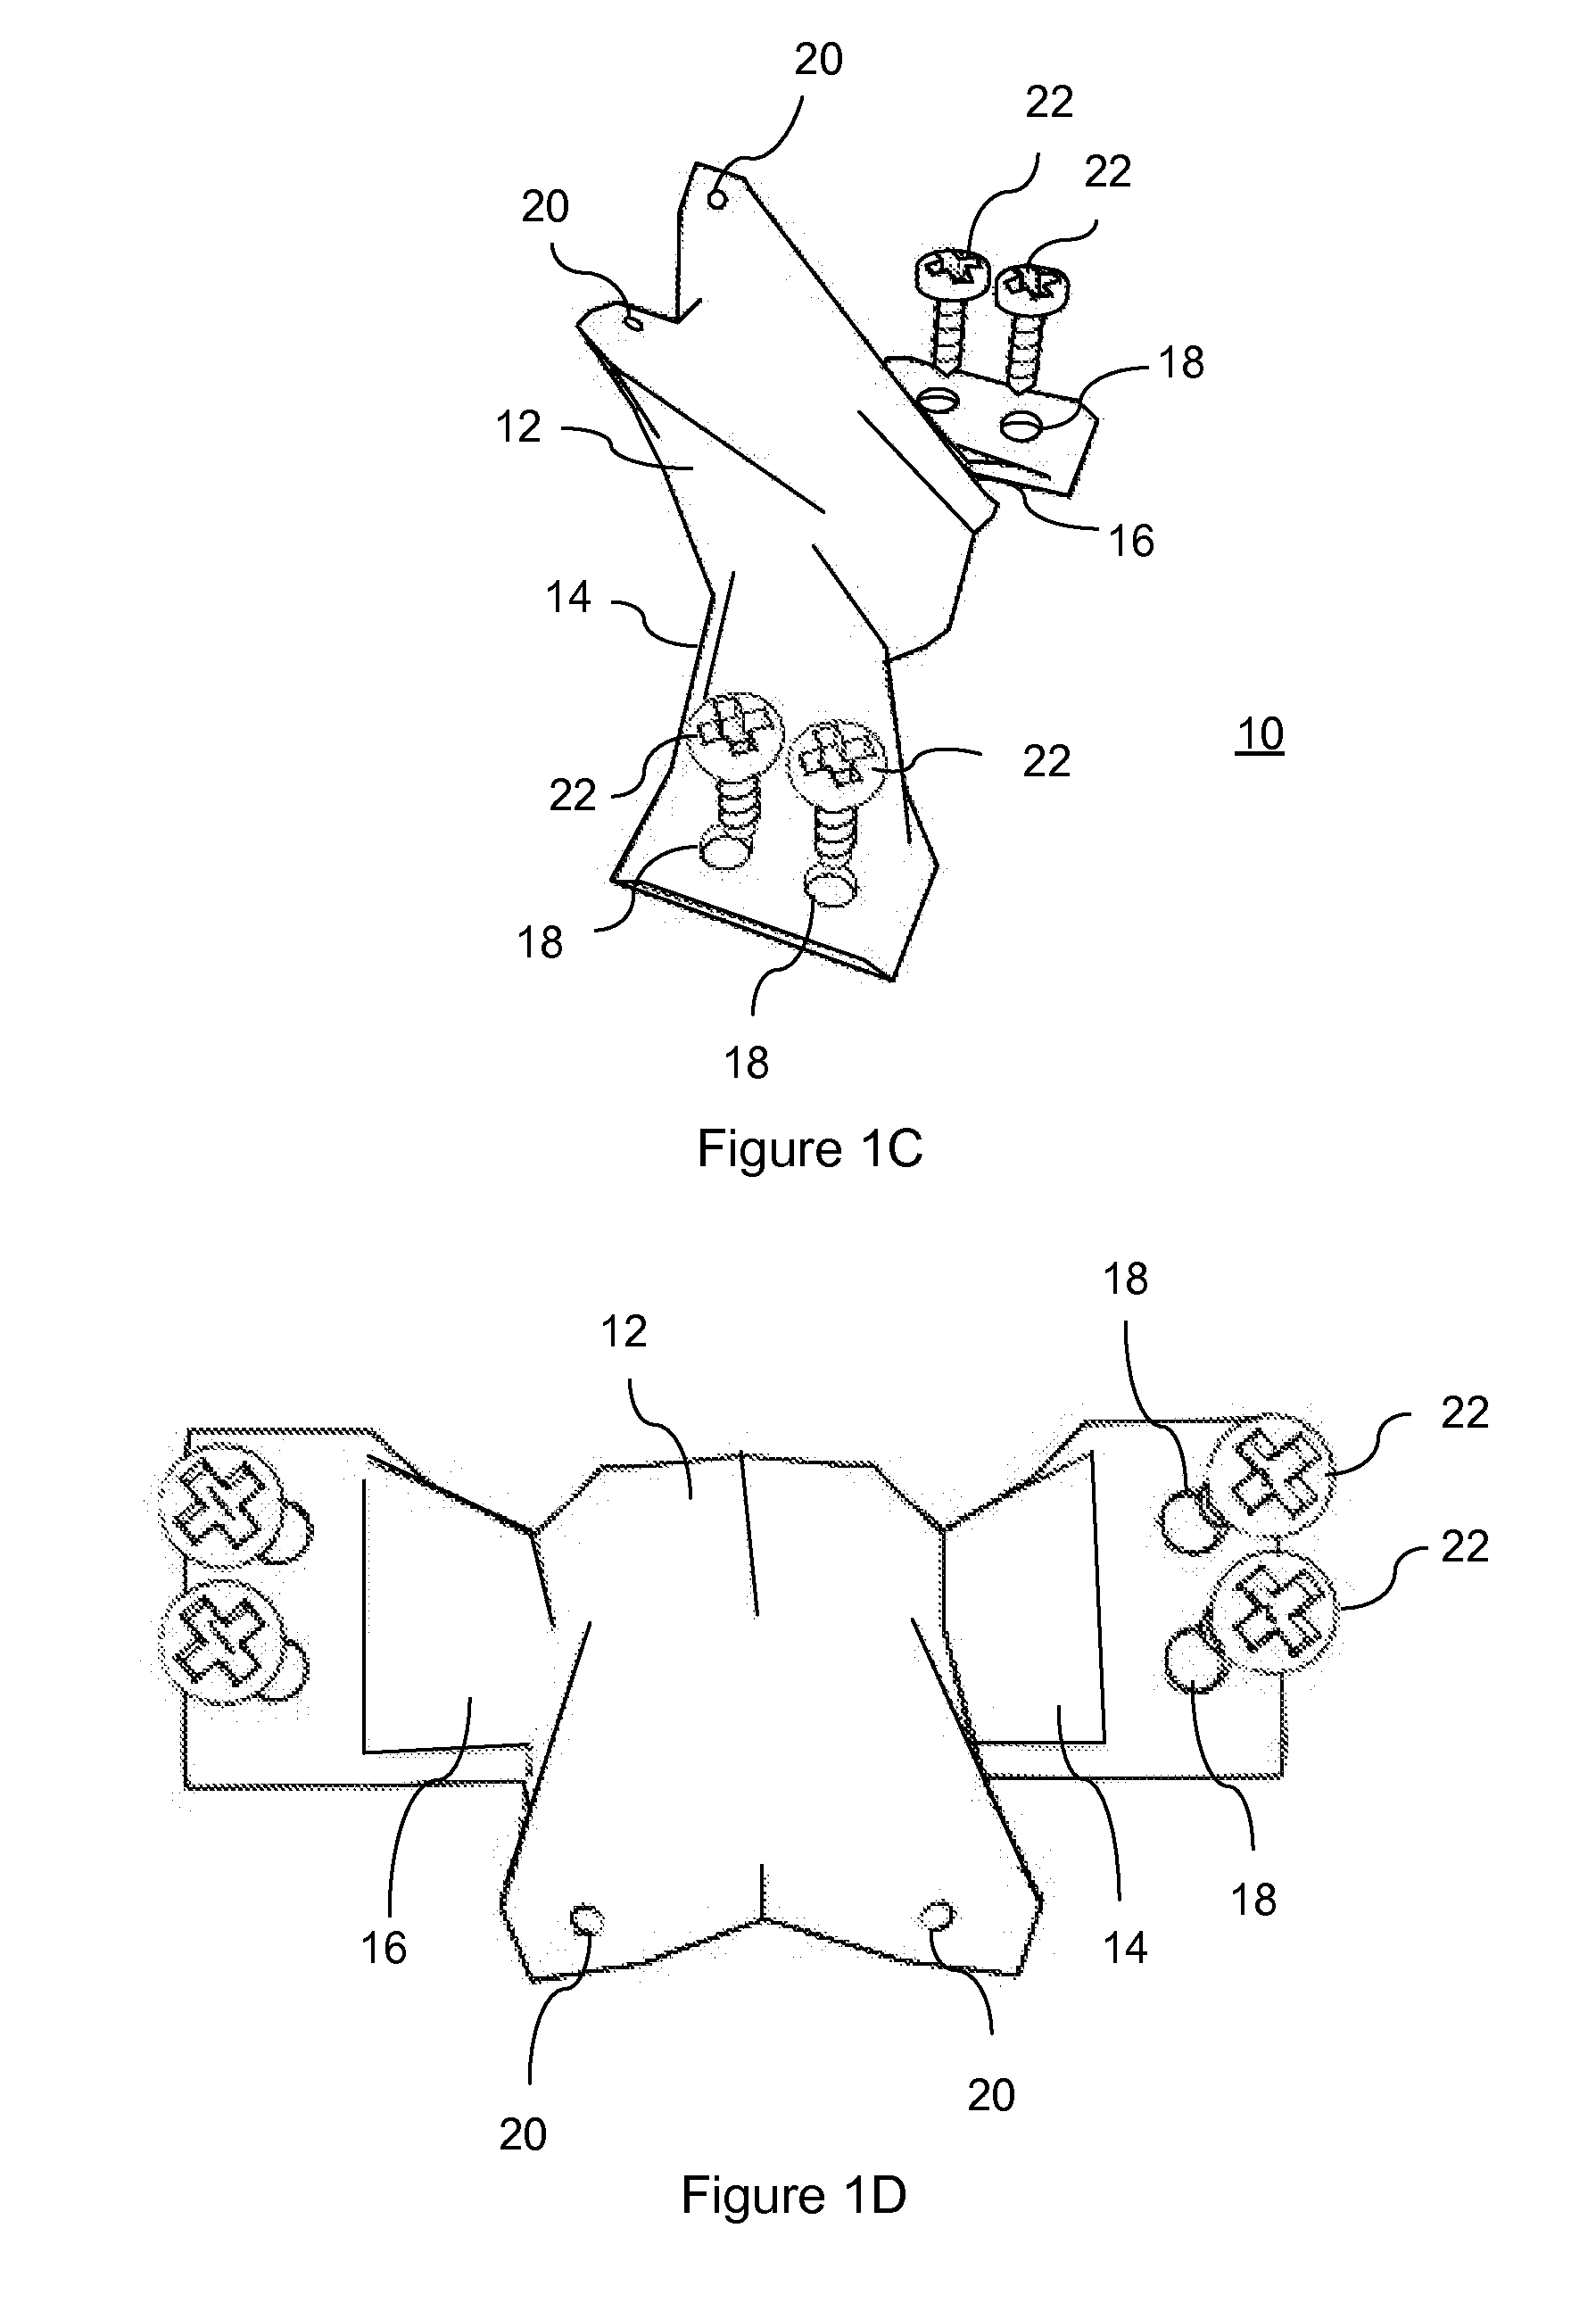 Total artificial spino-laminar prosthetic replacement